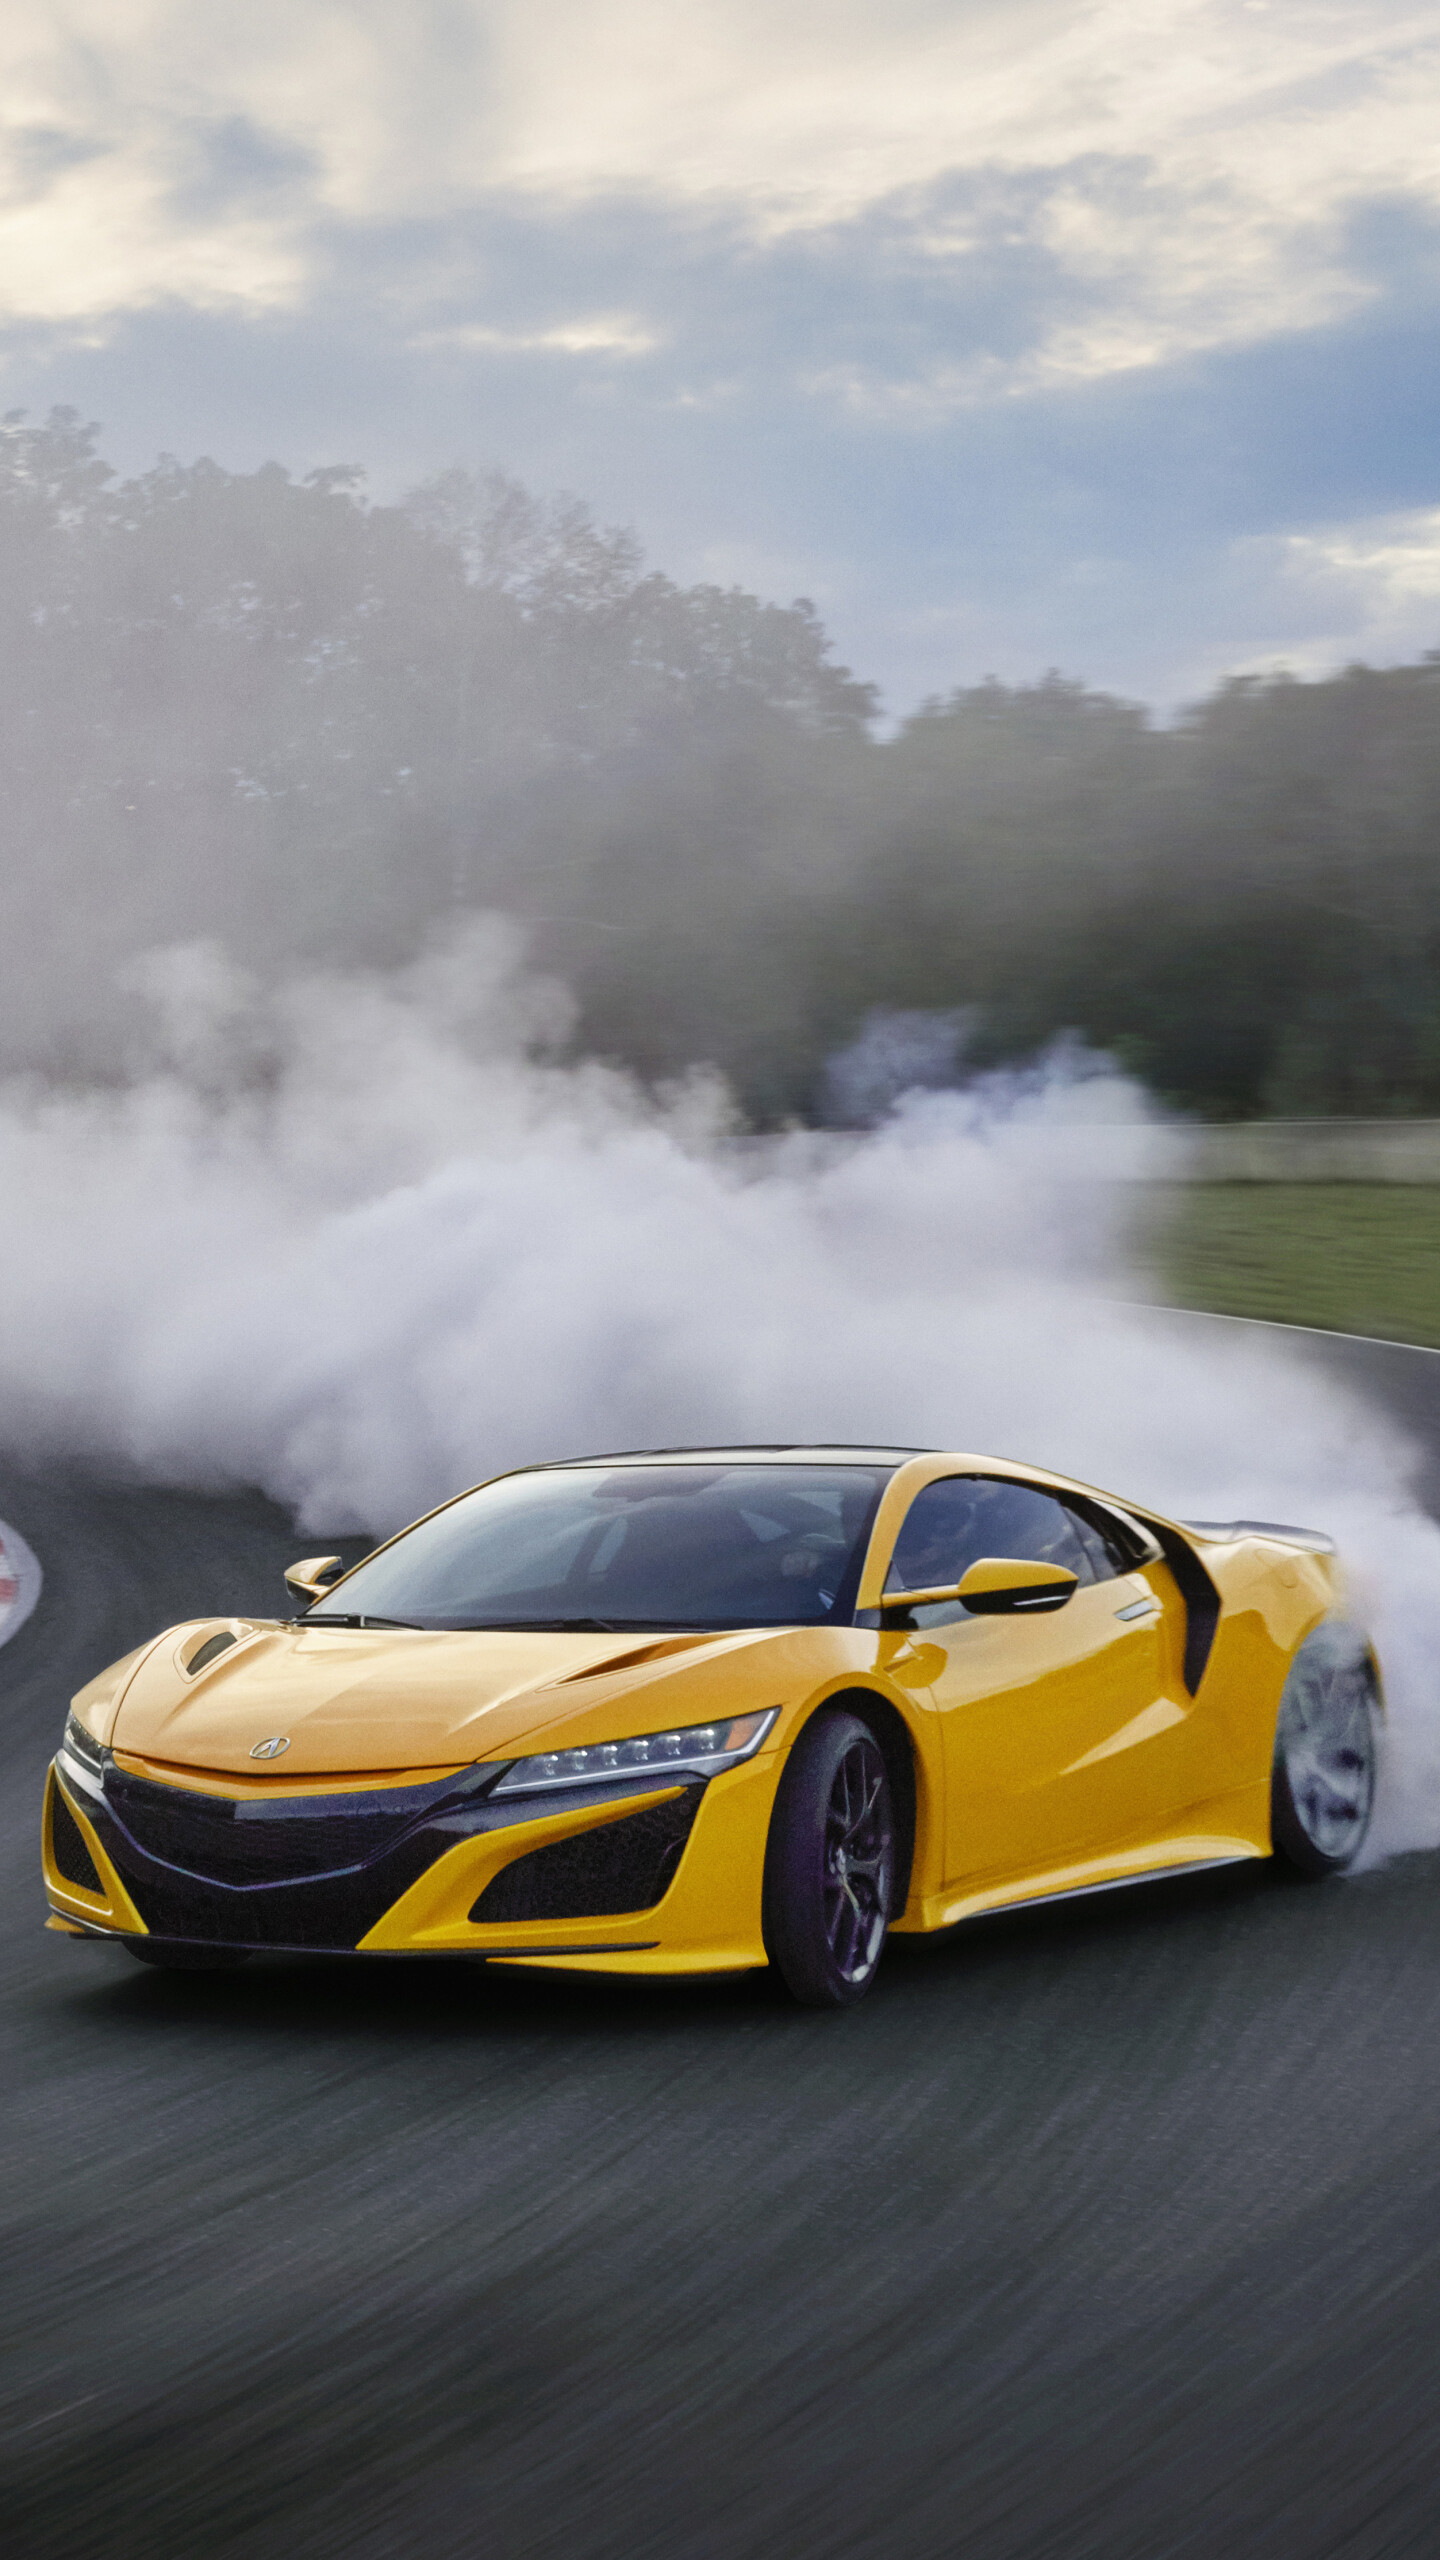 Acura: NSX, A two-seat, mid-engined coupe sports car manufactured by Honda. 1440x2560 HD Wallpaper.